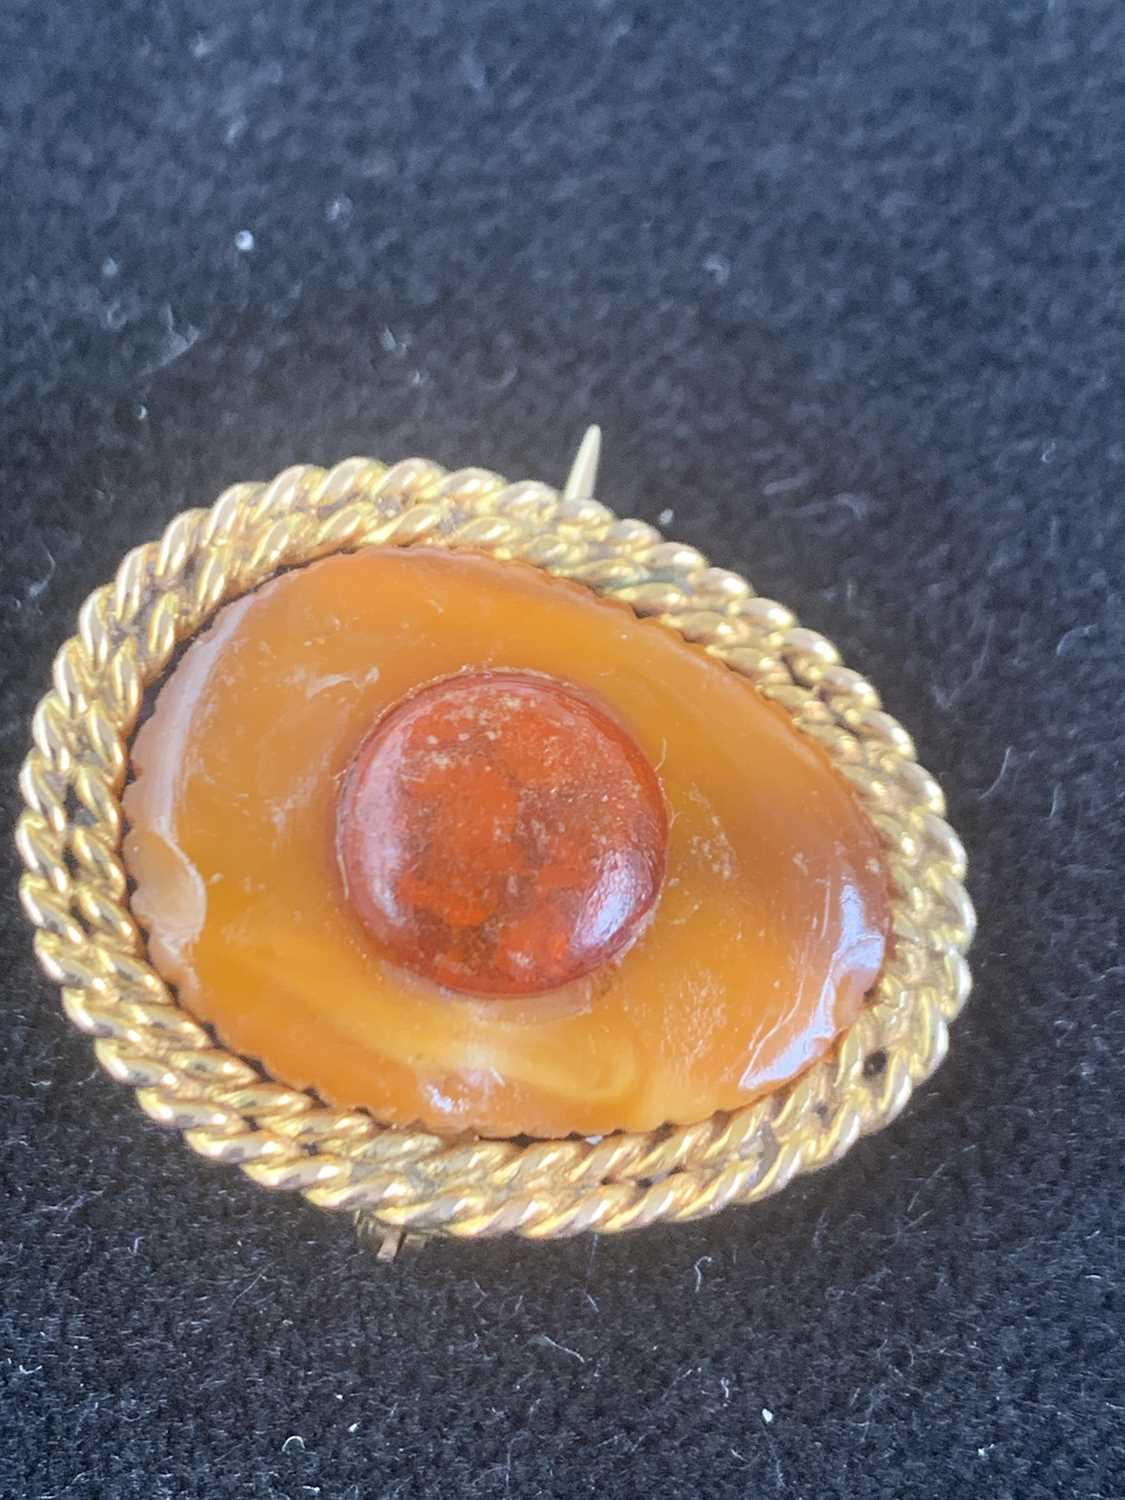 Lot 125 - An amber and gold brooch